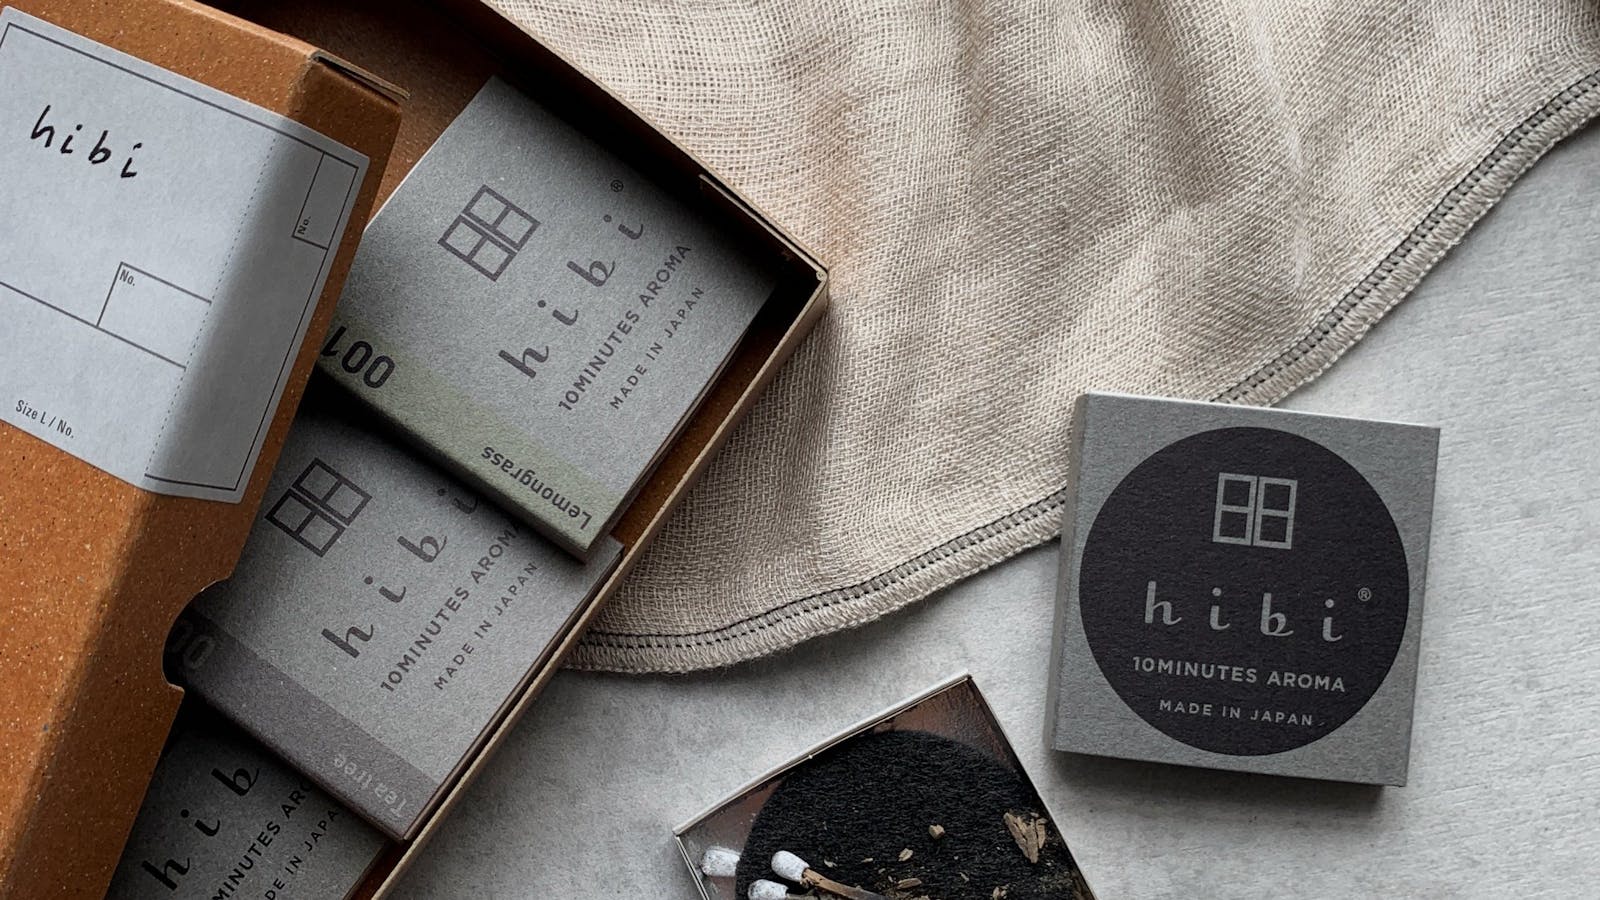 A world of beautiful homewares is collected at the maker, including Japanese incense brand, 'hibi'